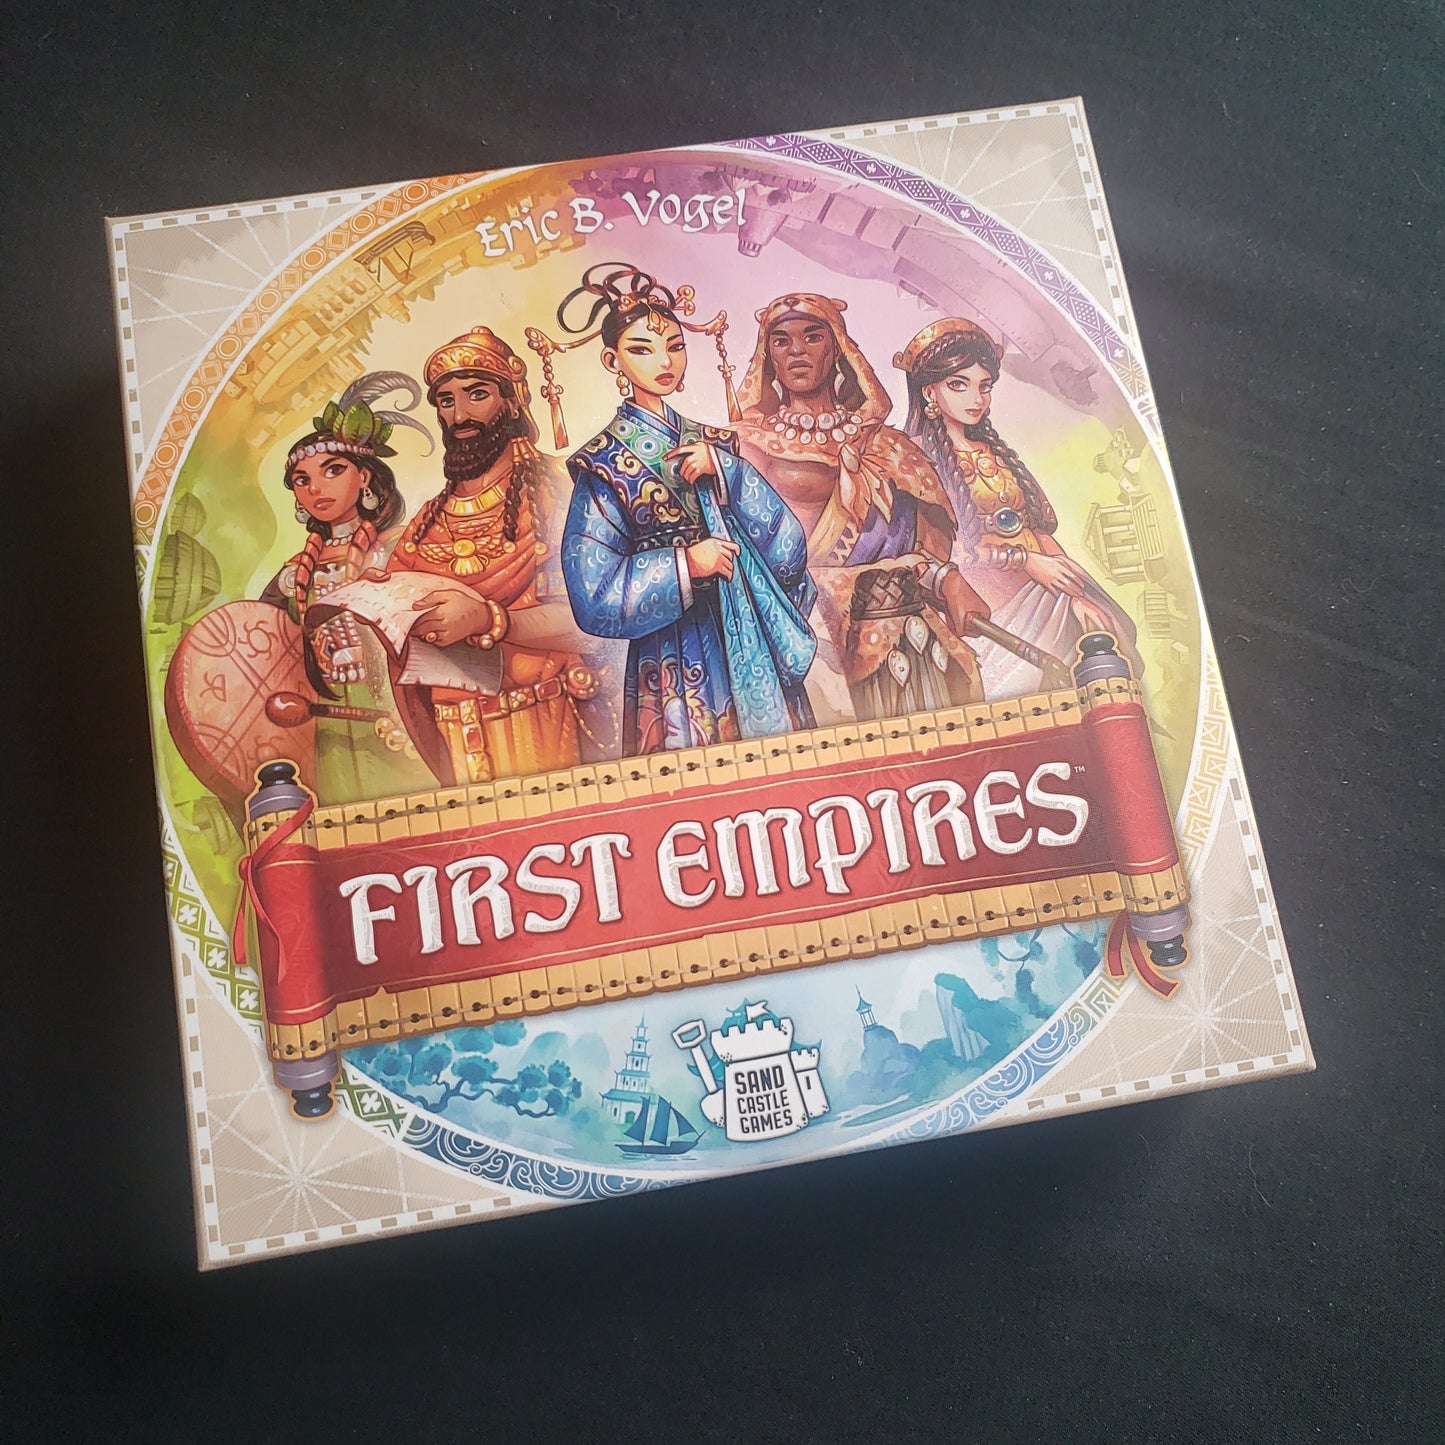 Image shows the front cover of the box of the First Empires board game